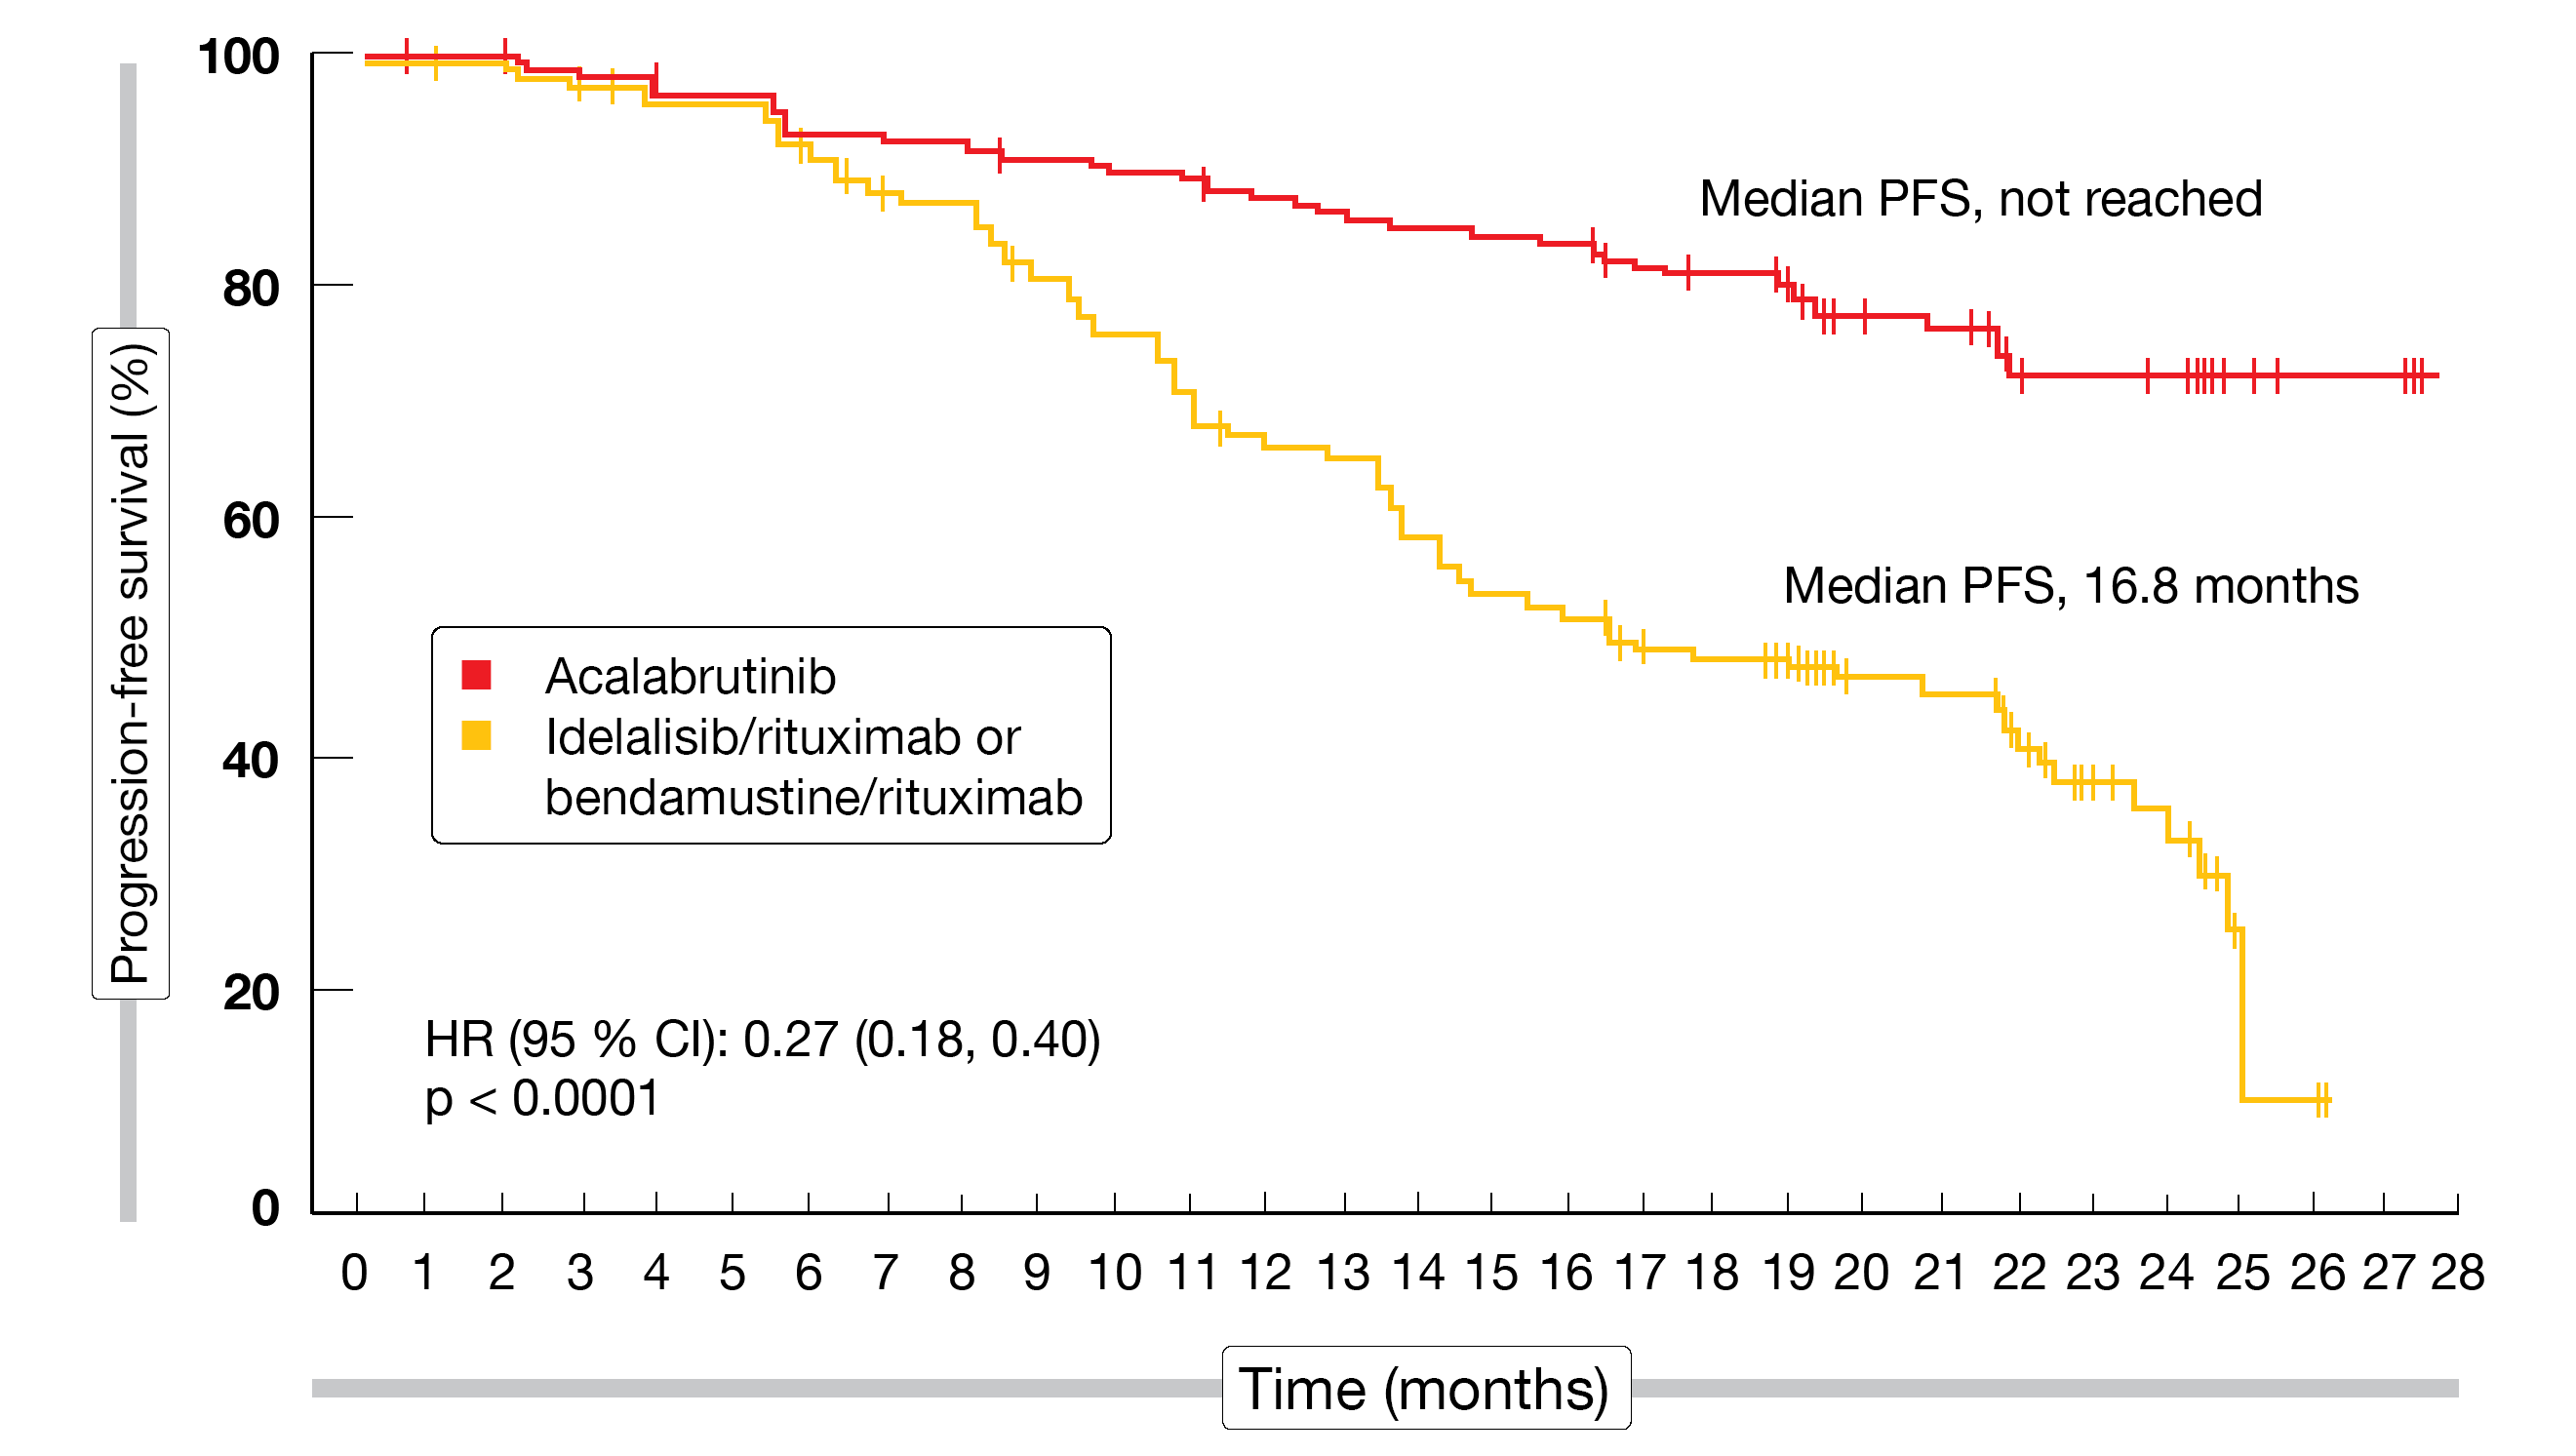 Figure 1: ASCEND: progression-free survival for acalabrutinib vs. idelalisib/rituximab or bendamustine/rituximab in the relapsed/refractory setting